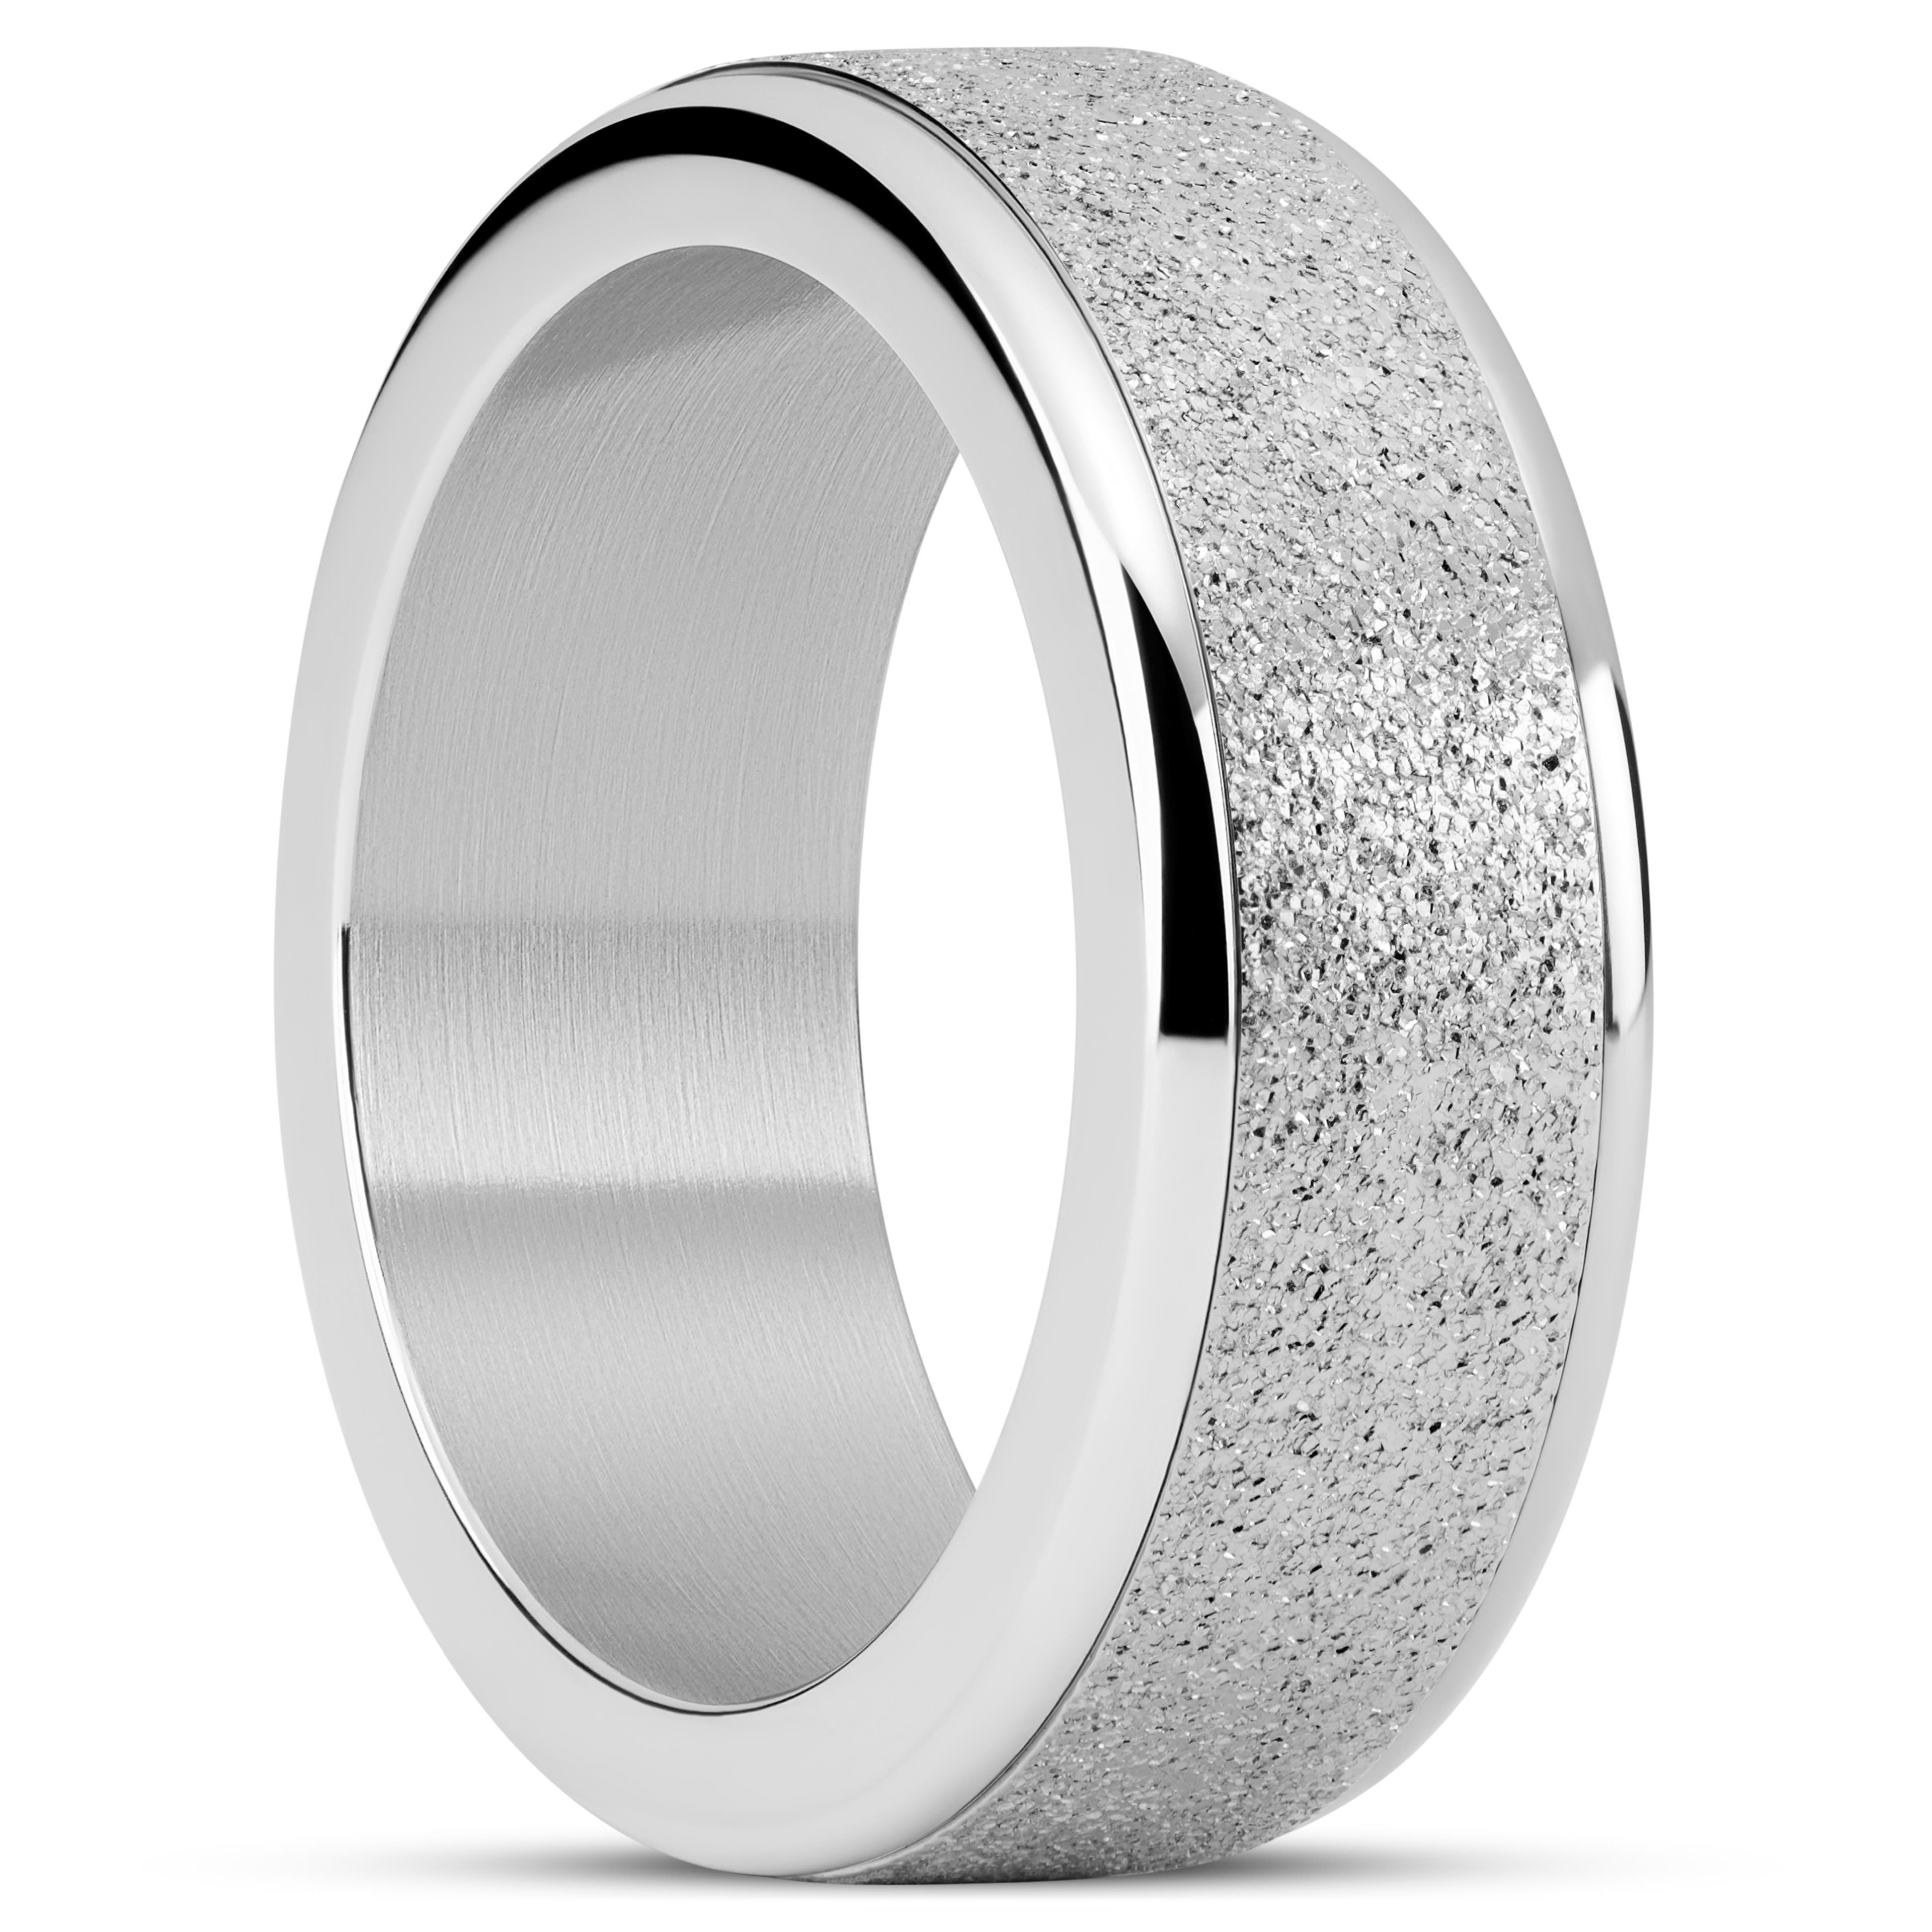 Enthumema | 1/3" (8 mm) Glittery Silver-tone Stainless Steel Fidget Ring